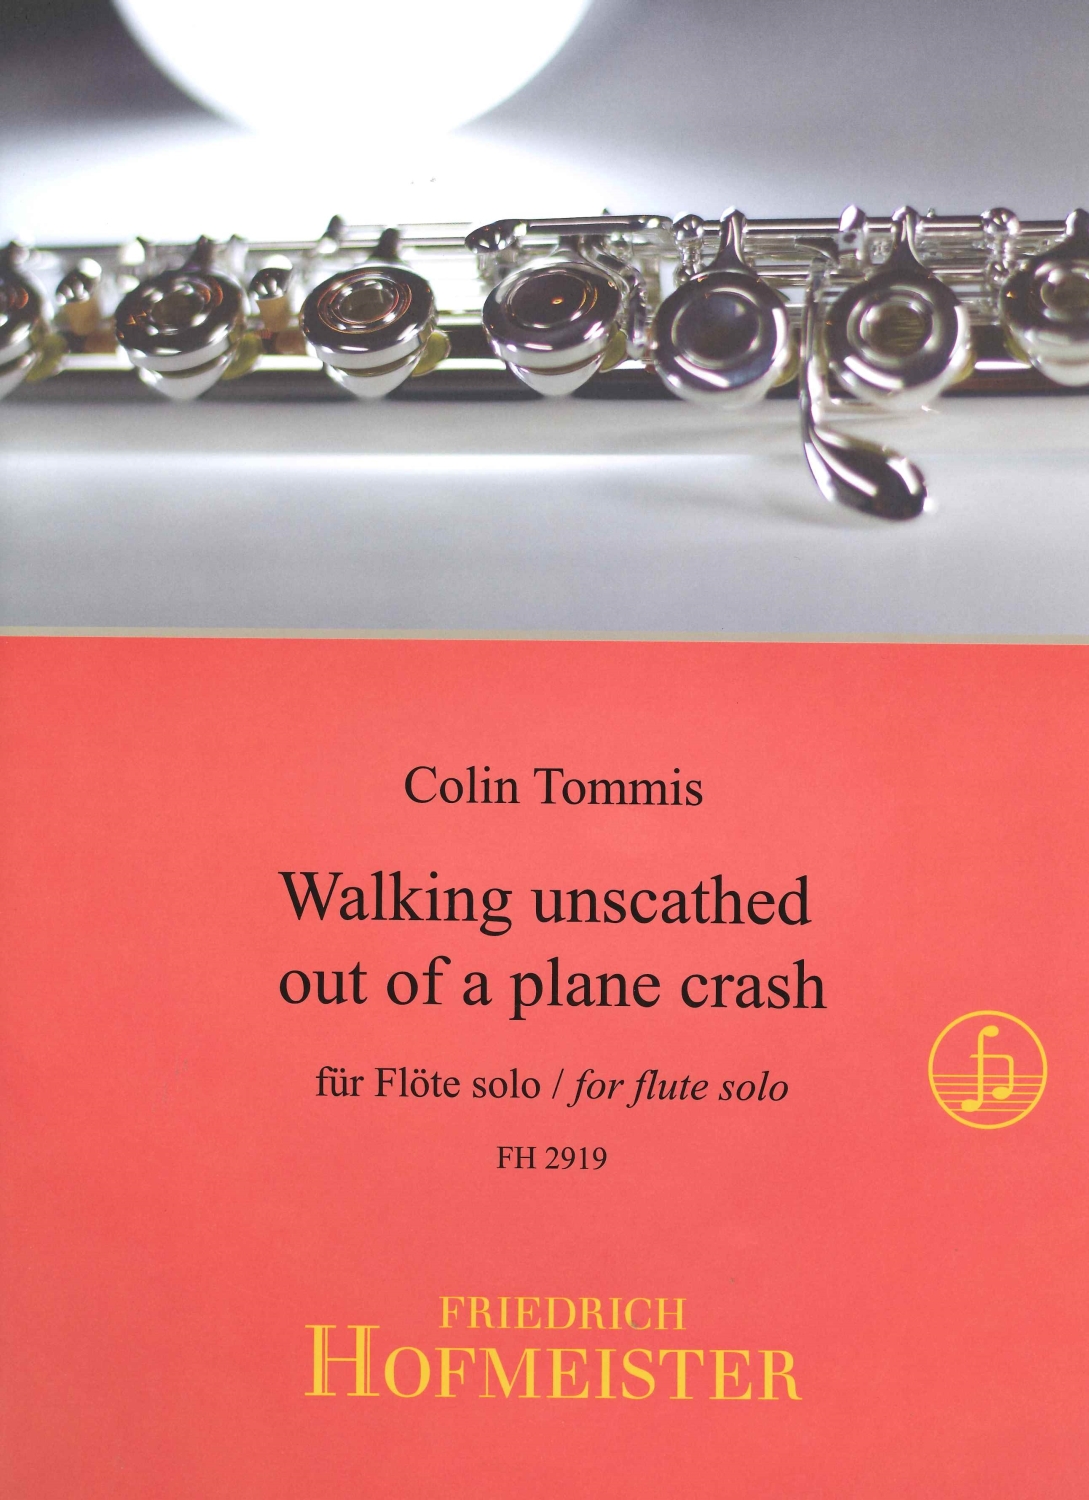 colin-tommis-walking-unscathes-out-of-a-plane-cras_0001.JPG